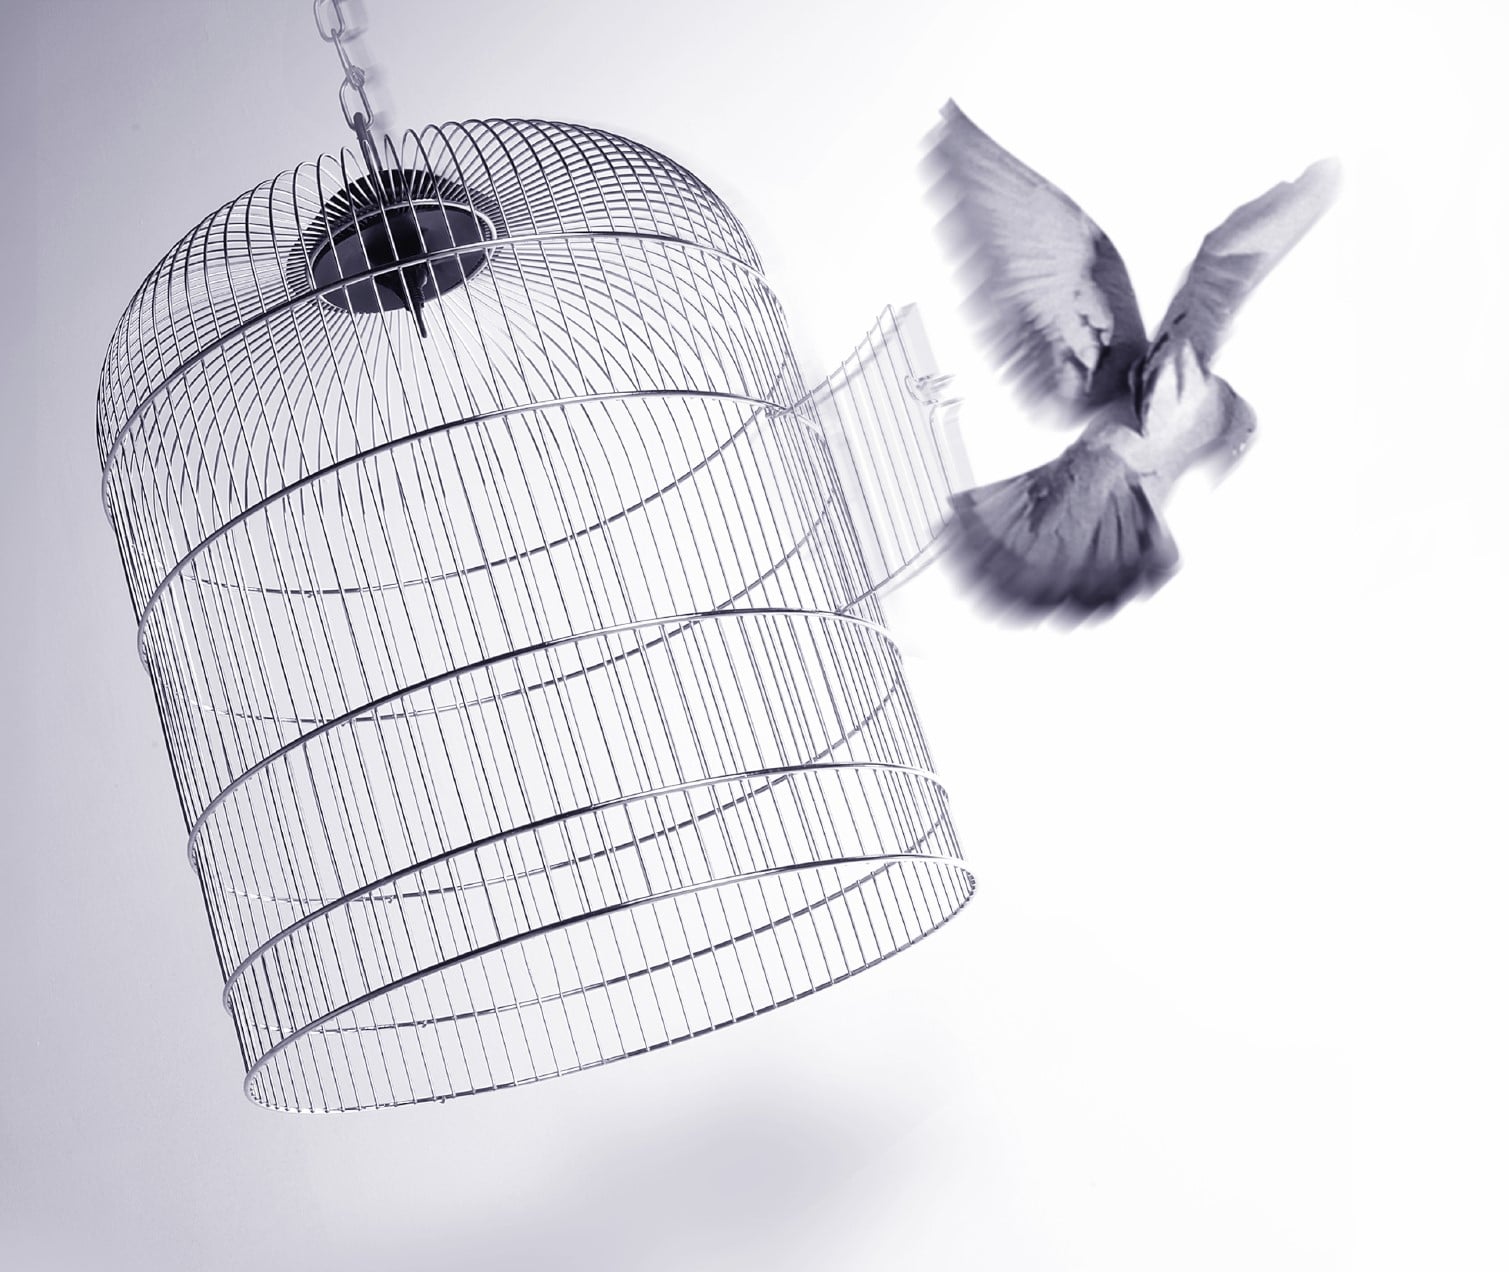 Bird out of Cage demonstrates the power of unleashing other leaders.